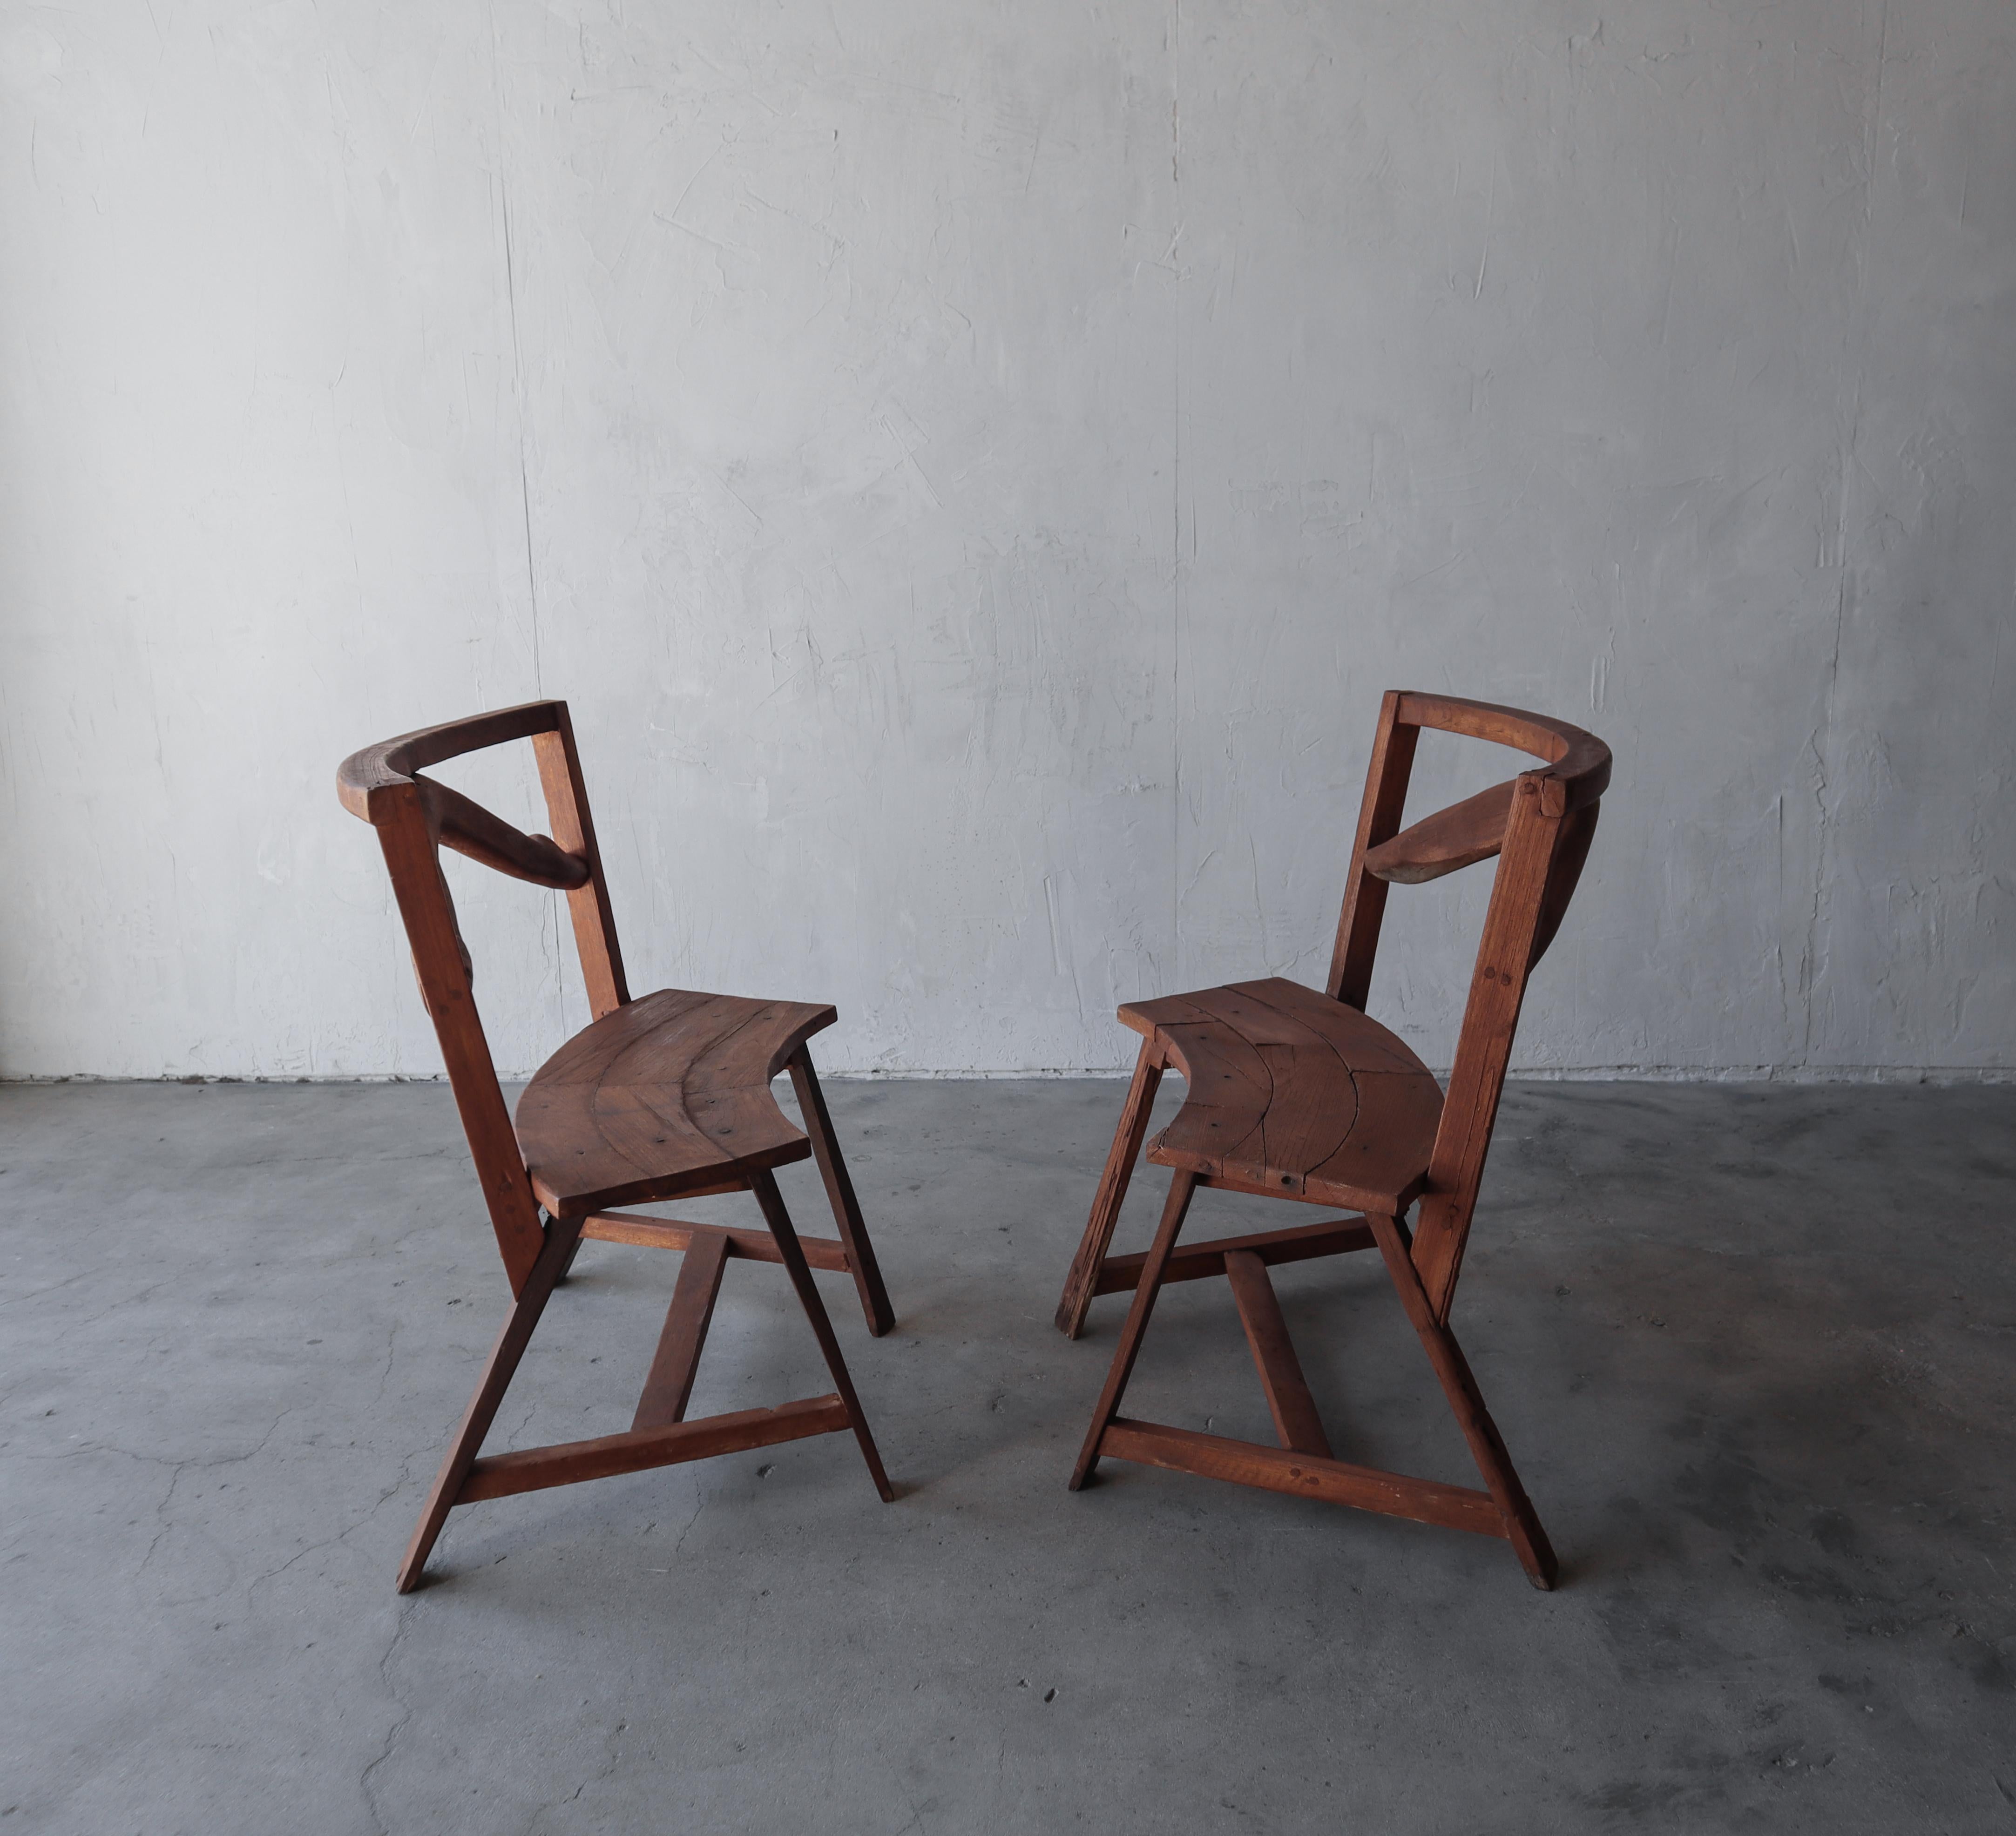 20th Century Pair of Primitive Bespoke Bench Chairs For Sale